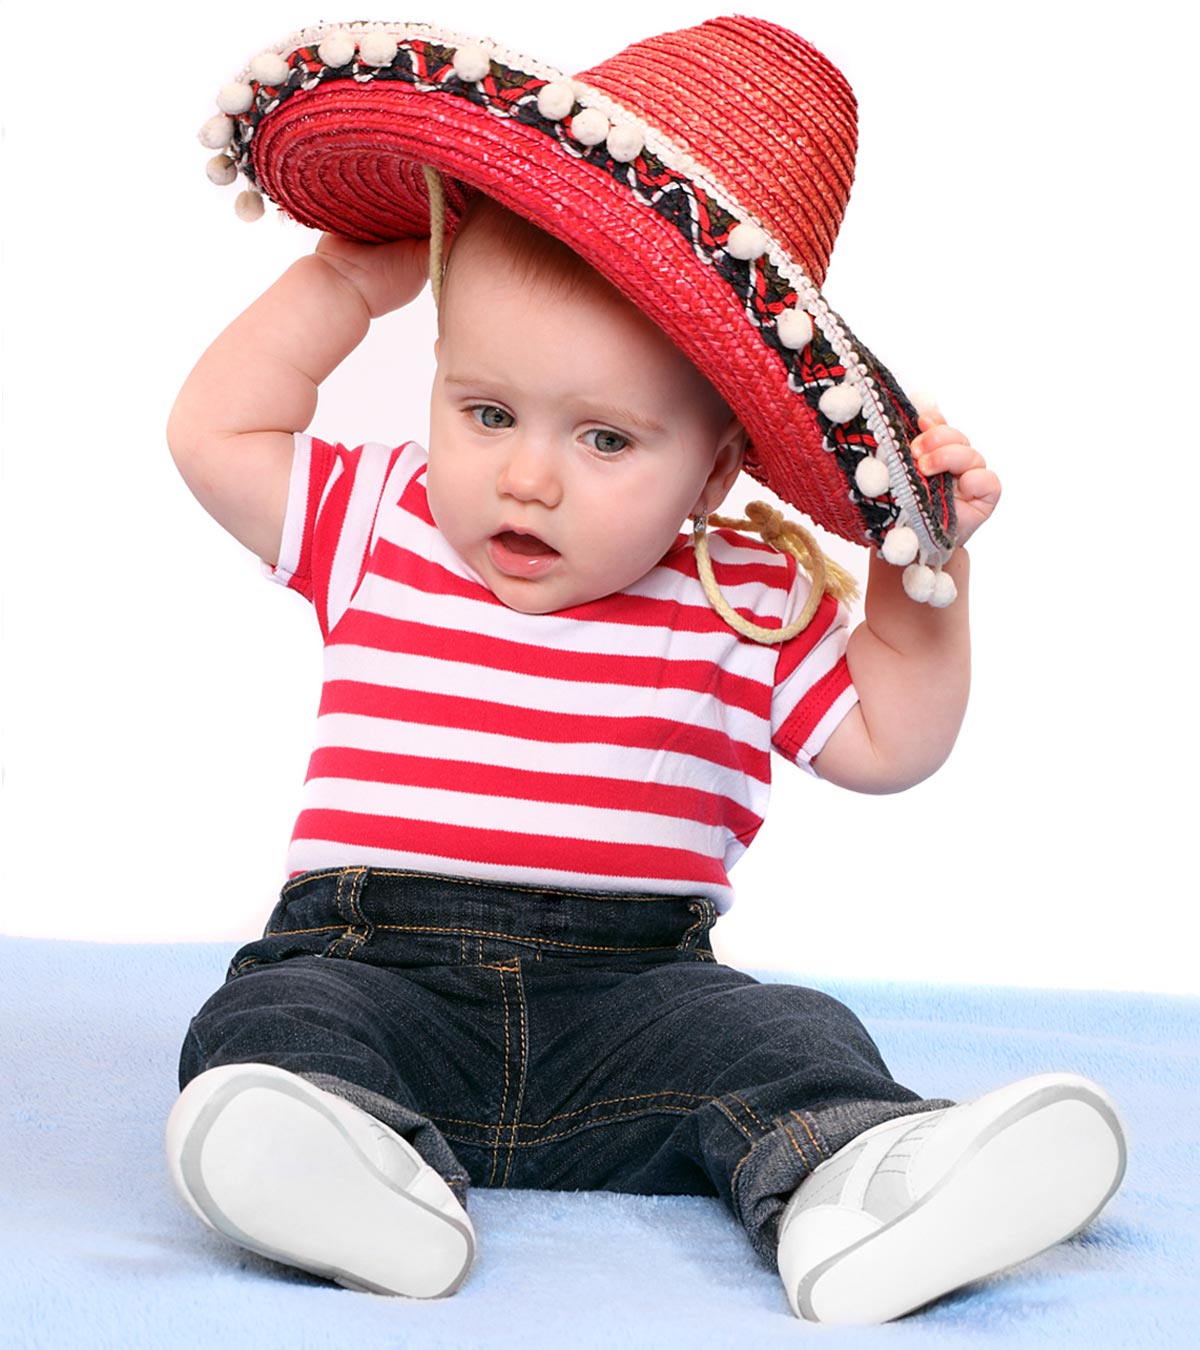 200 Most Popular Mexican Baby Names For Girls And Boys